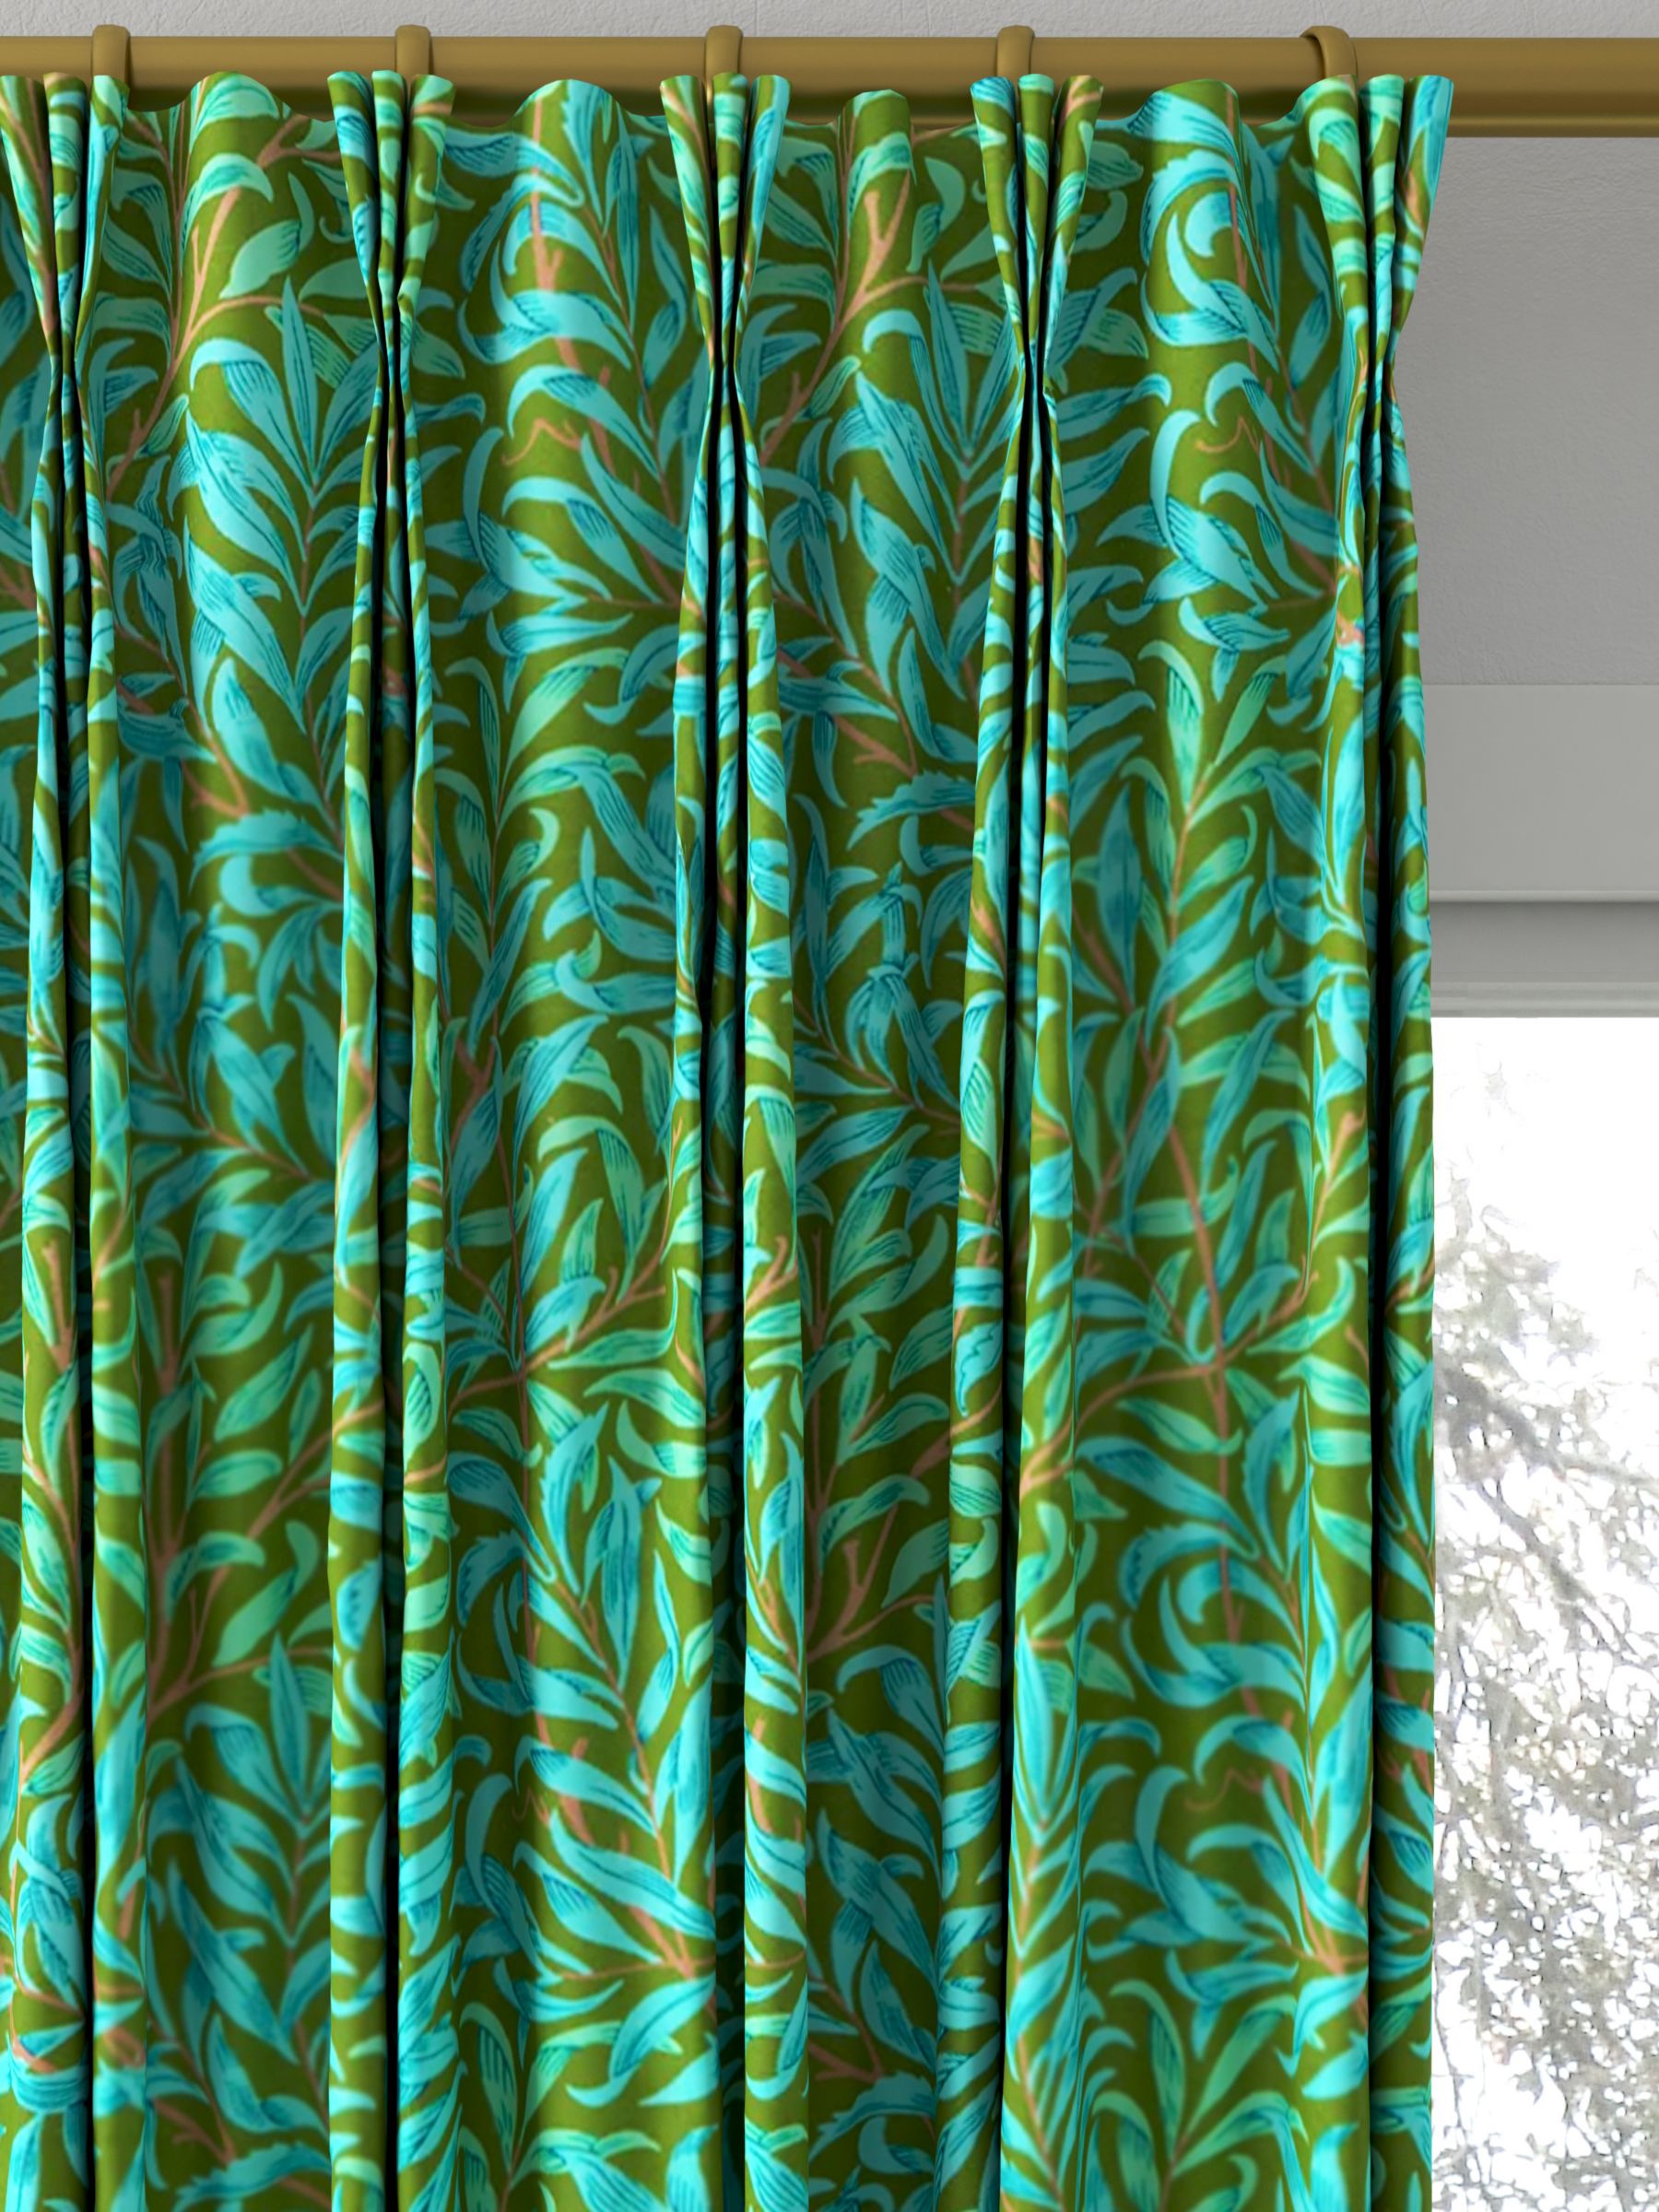 Morris & Co. Willow Boughs Made to Measure Curtains, Olive/Turquoise